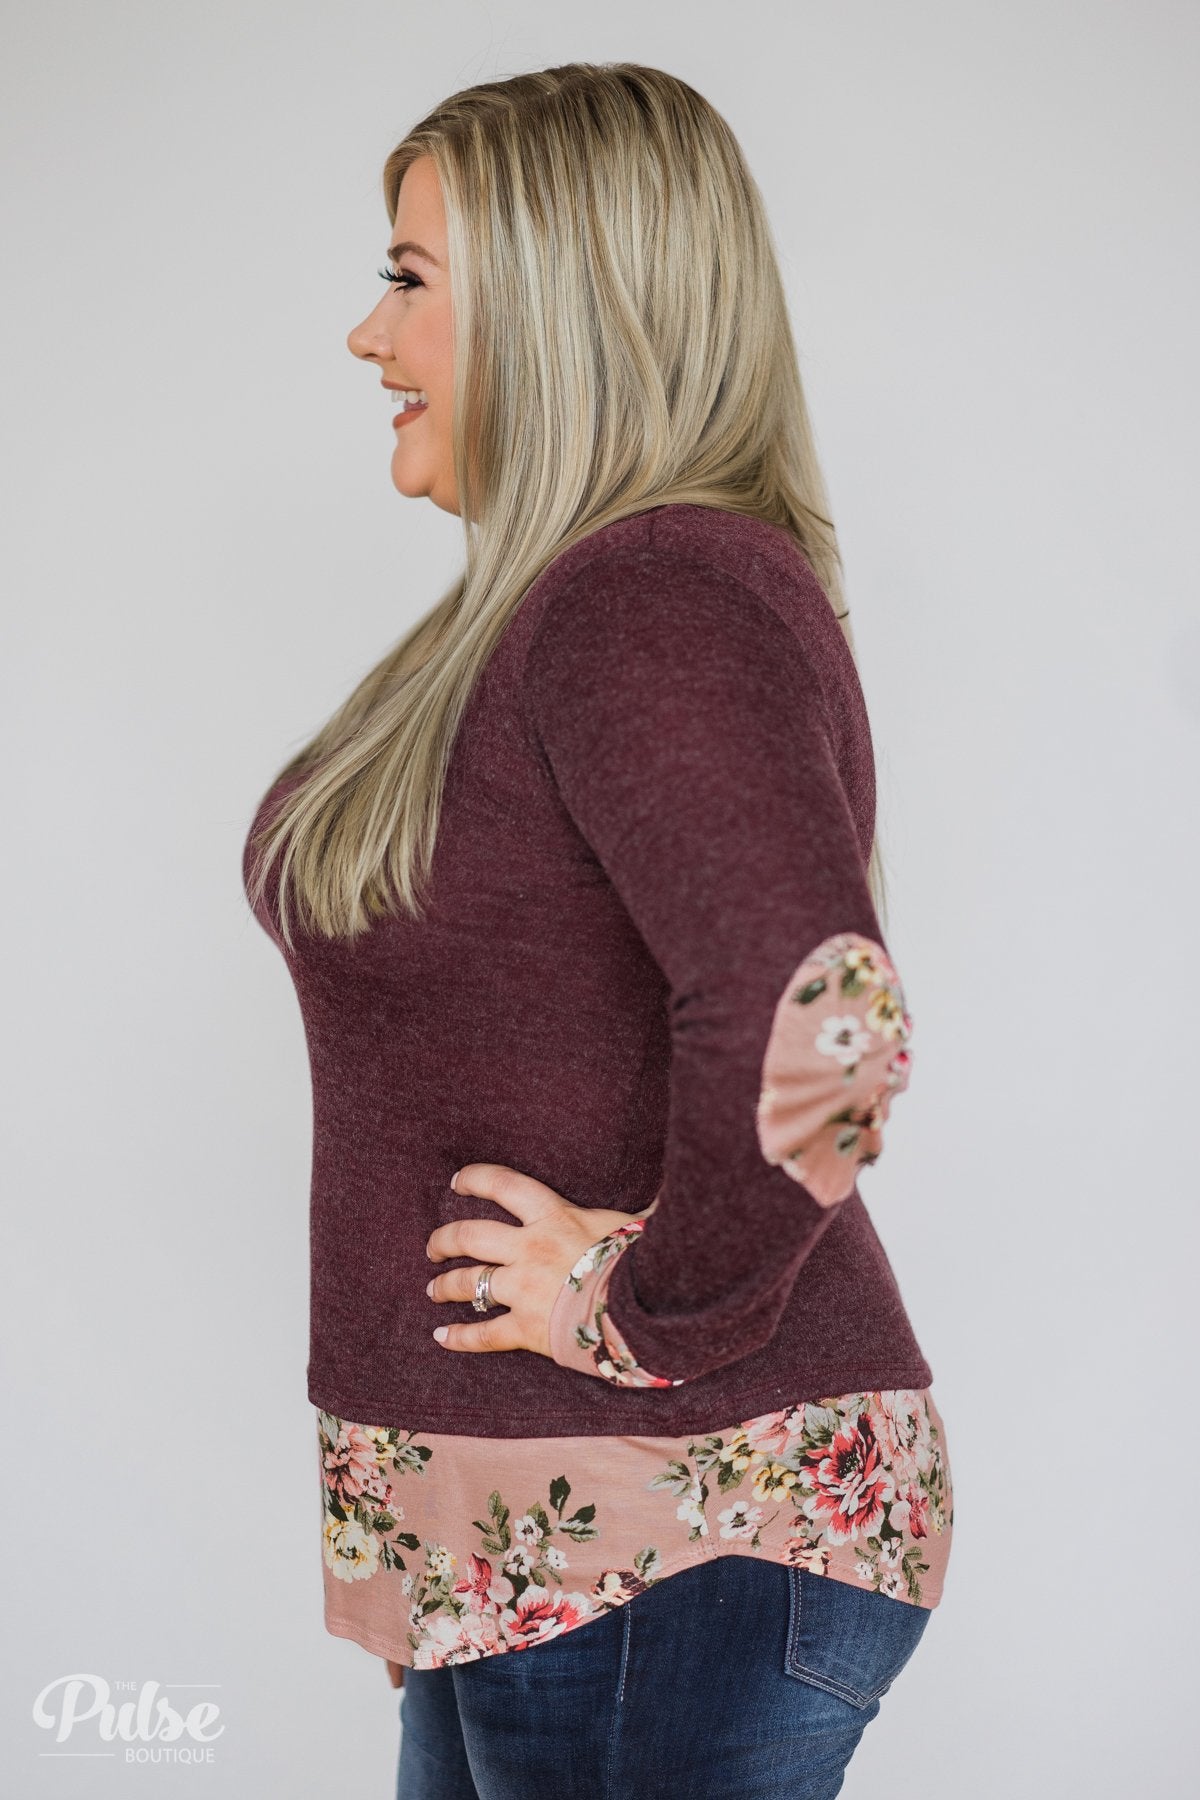 Floral Elbow Patch Top- Heathered Plum